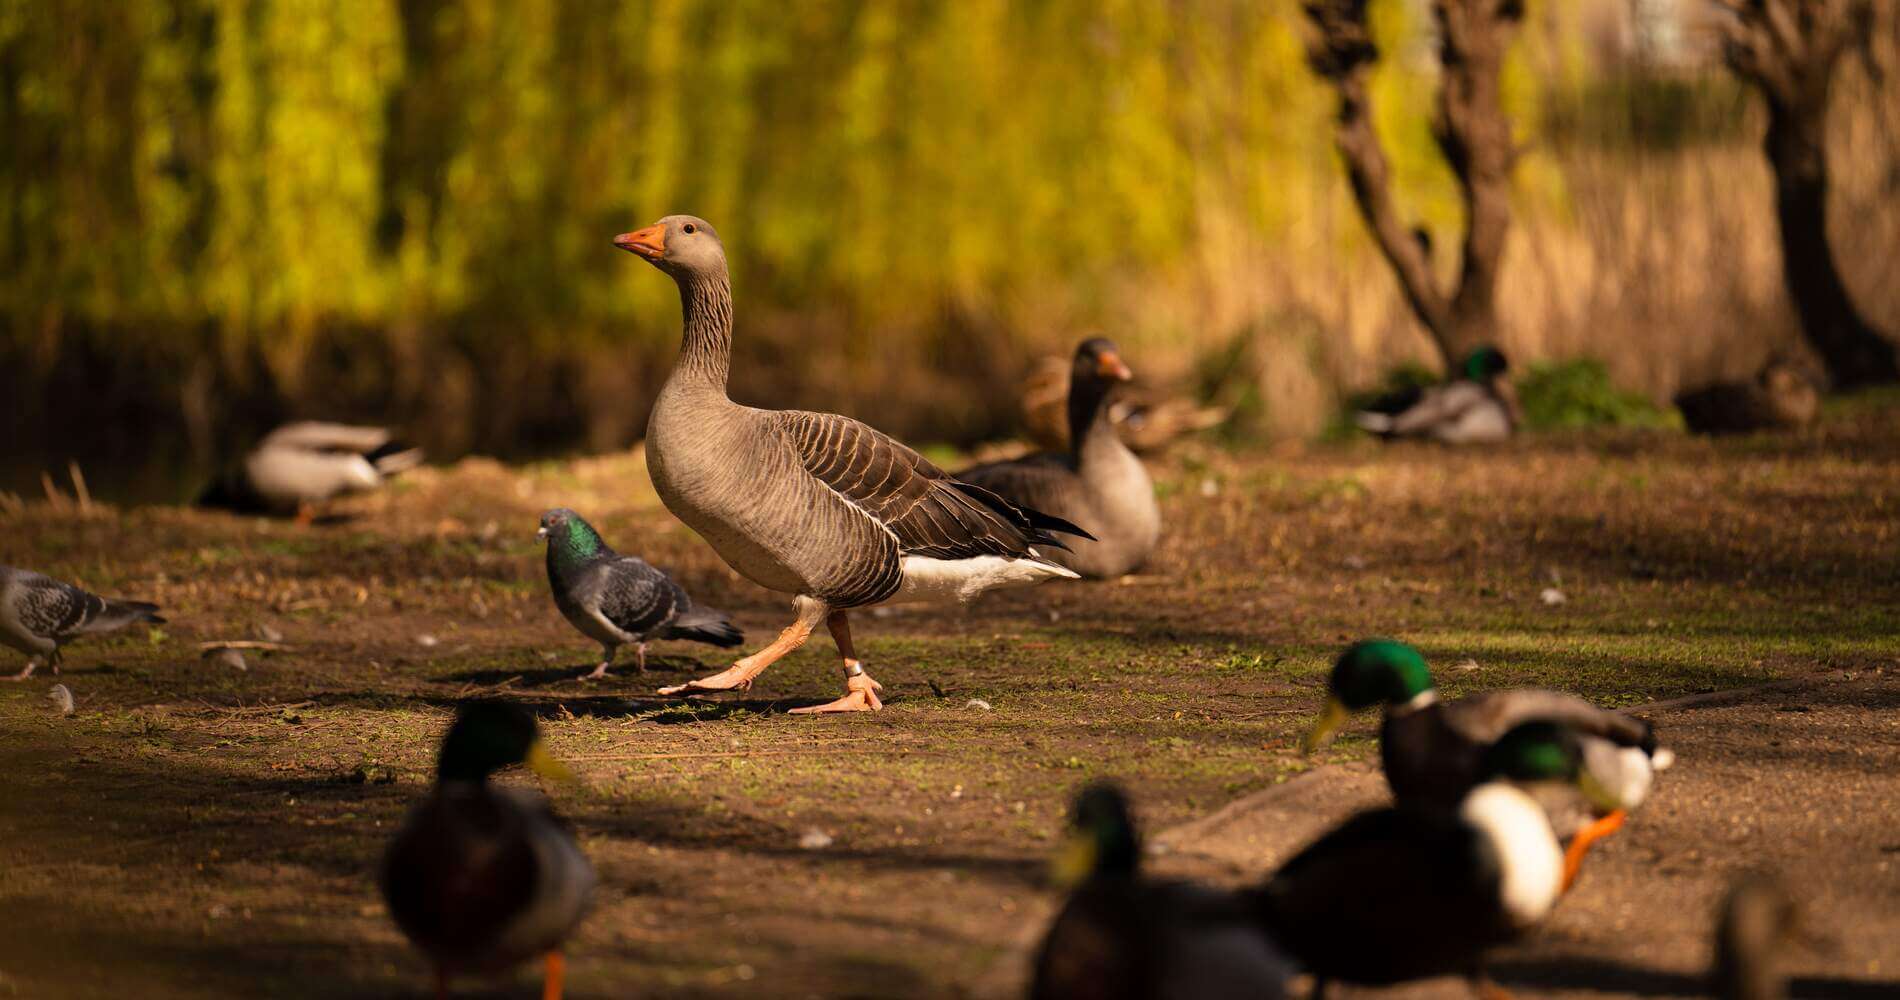 A geese surrounded by a pigeon and two ducks